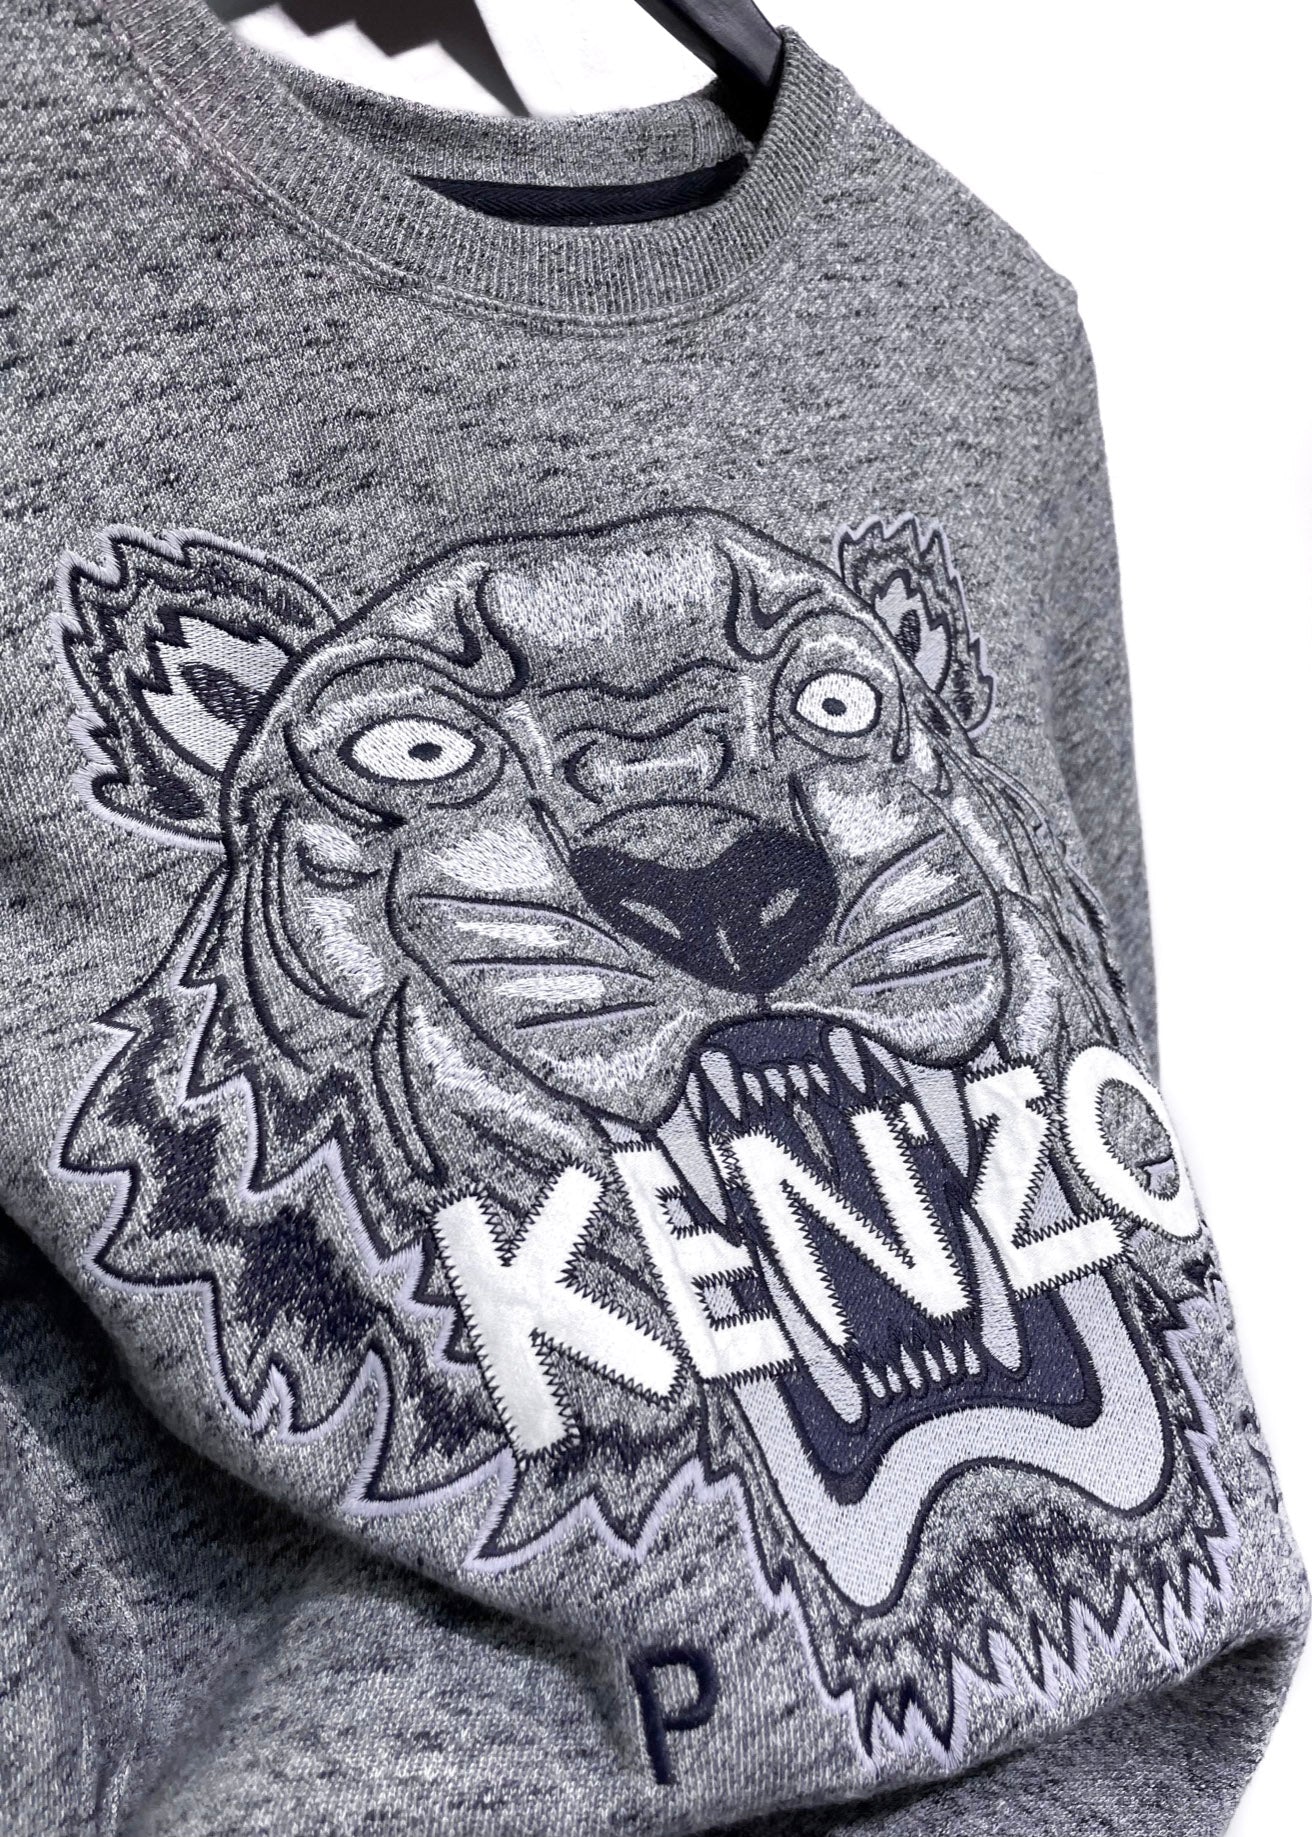 Kenzo Heather Grey Tiger Embroidered Sweatshirt – Boutique LUC.S